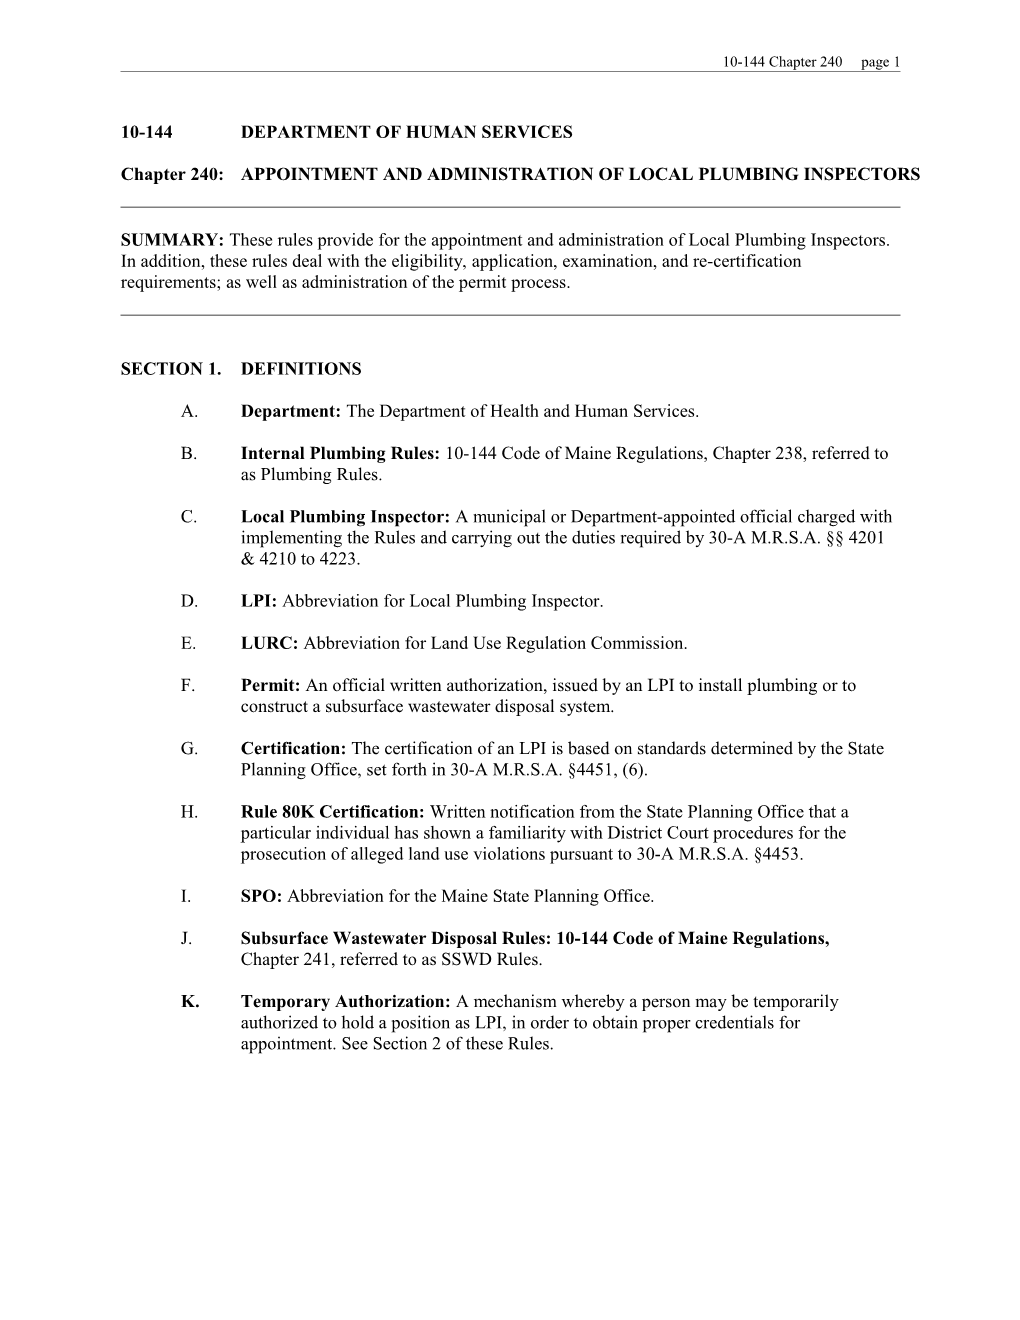 Rules for Appointment and Administration Of